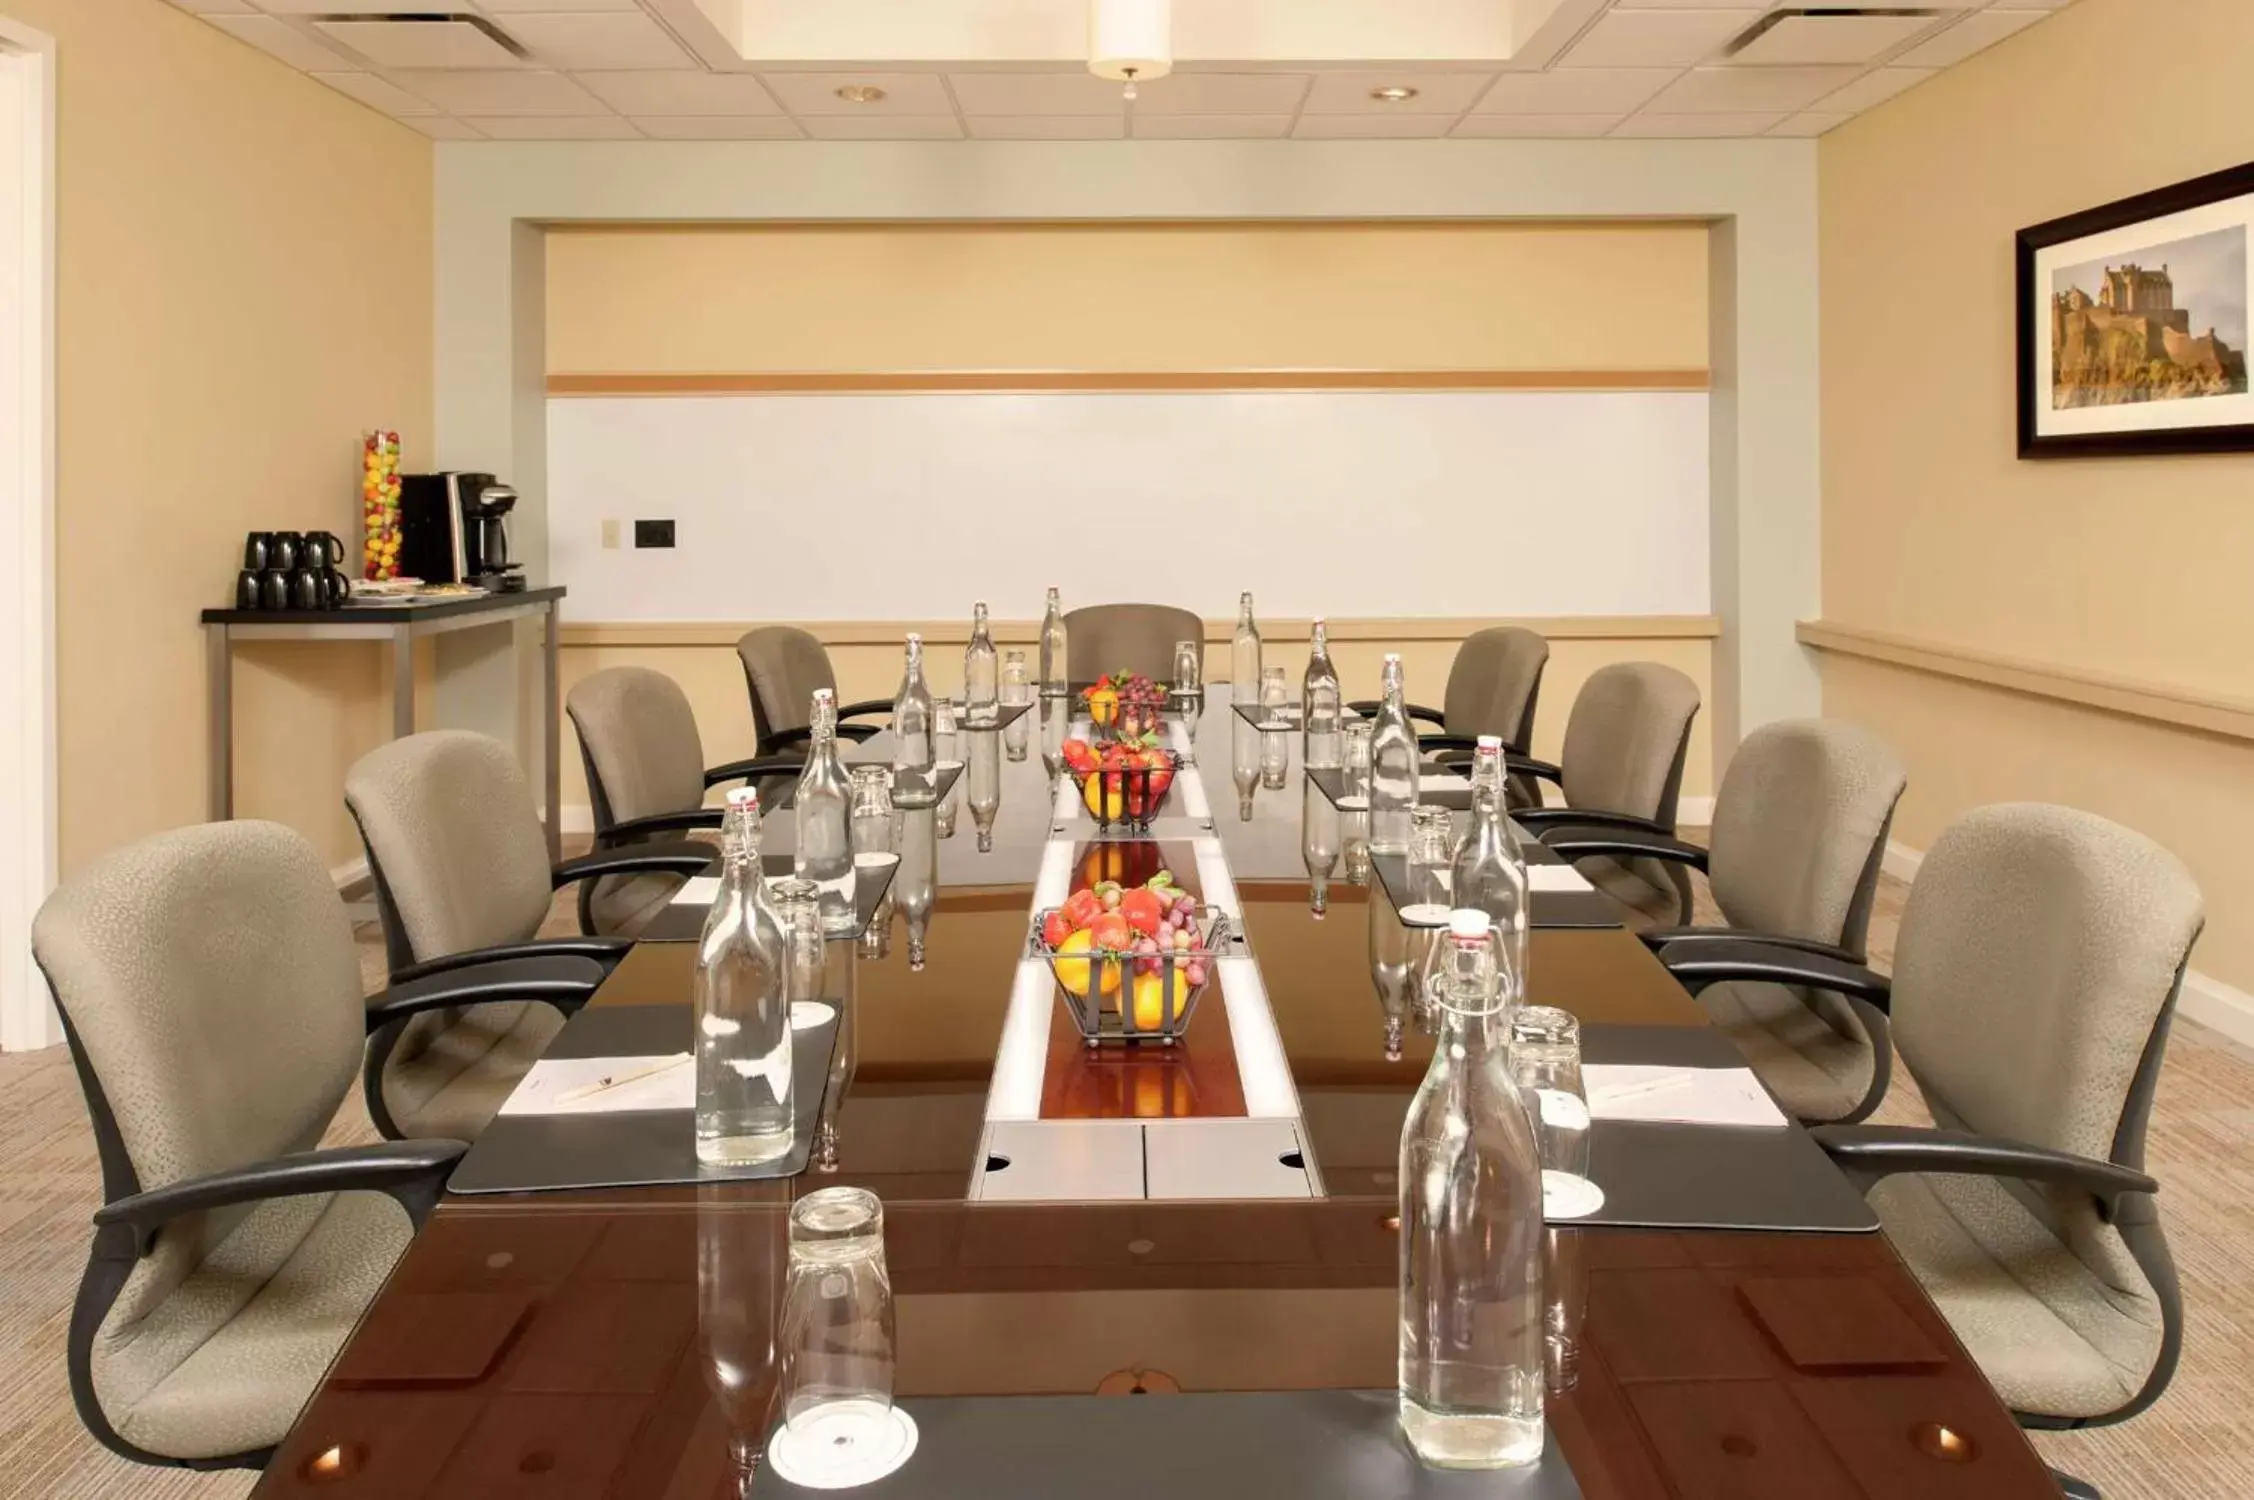 Meeting/conference room in DoubleTree by Hilton Hotel and Conference Center Chicago North Shore